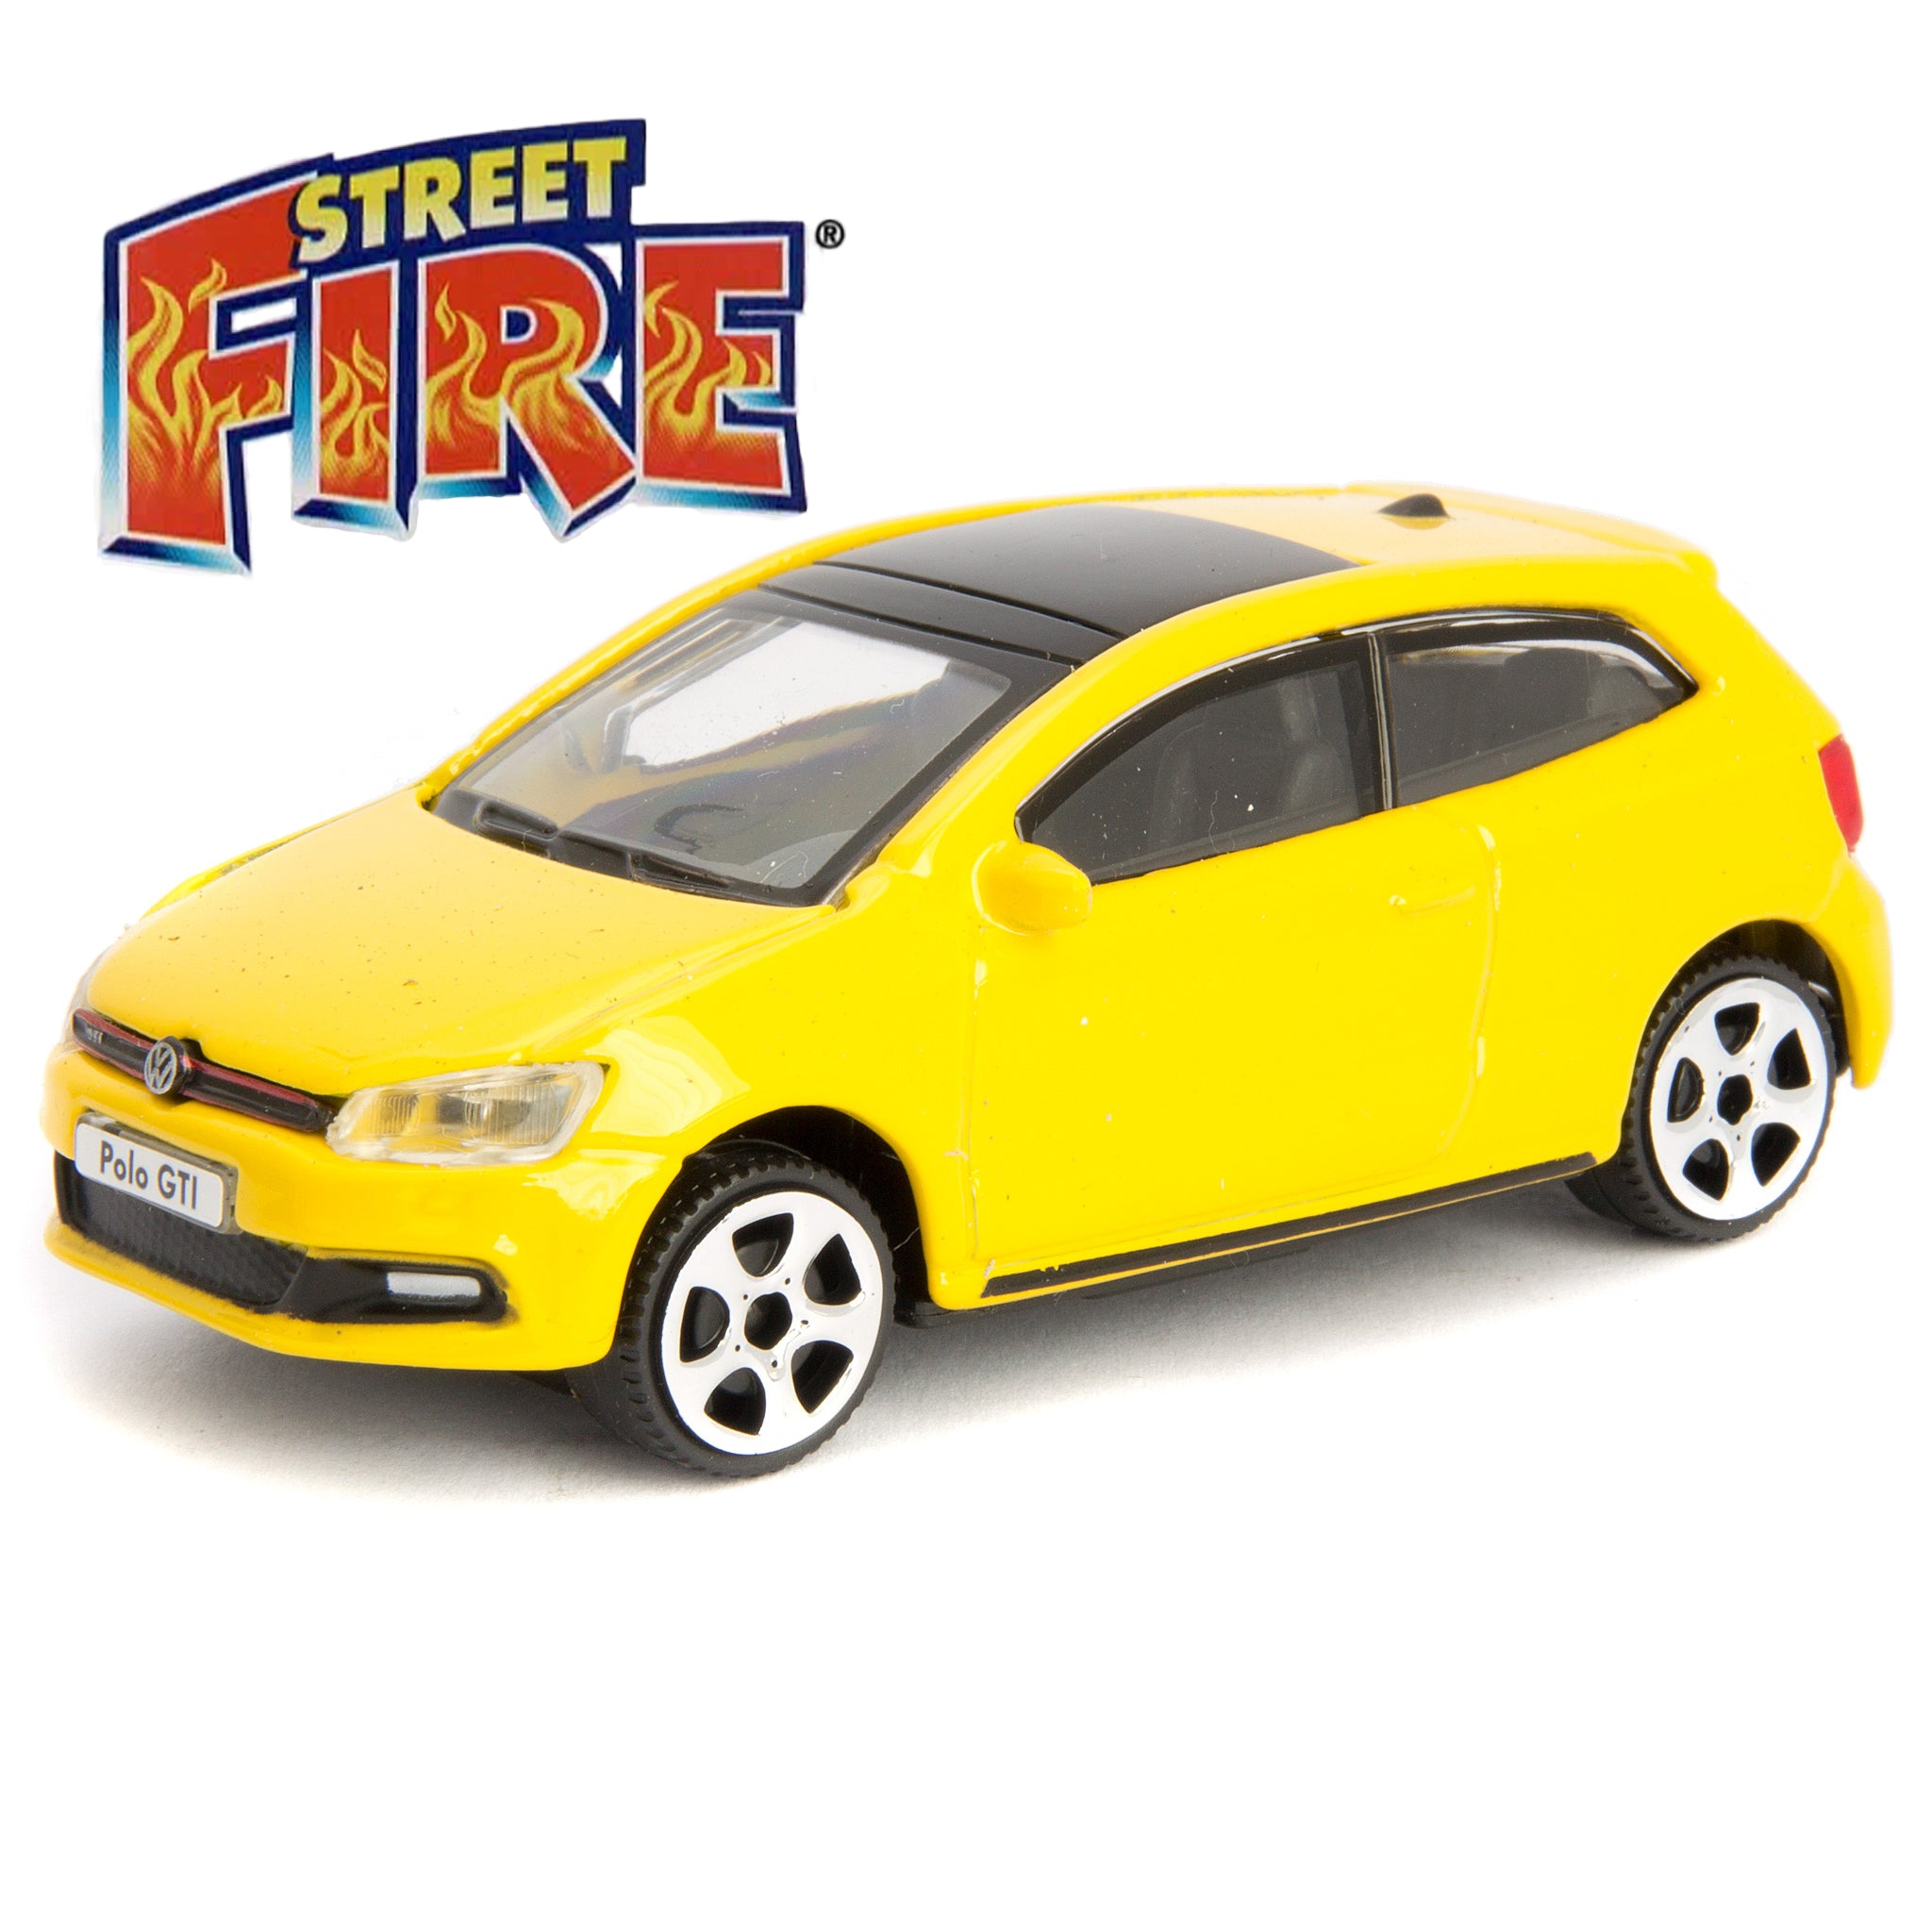 Volkswagen Polo GTi Mk5 Diecast Toy Car yellow - 1:43 Scale